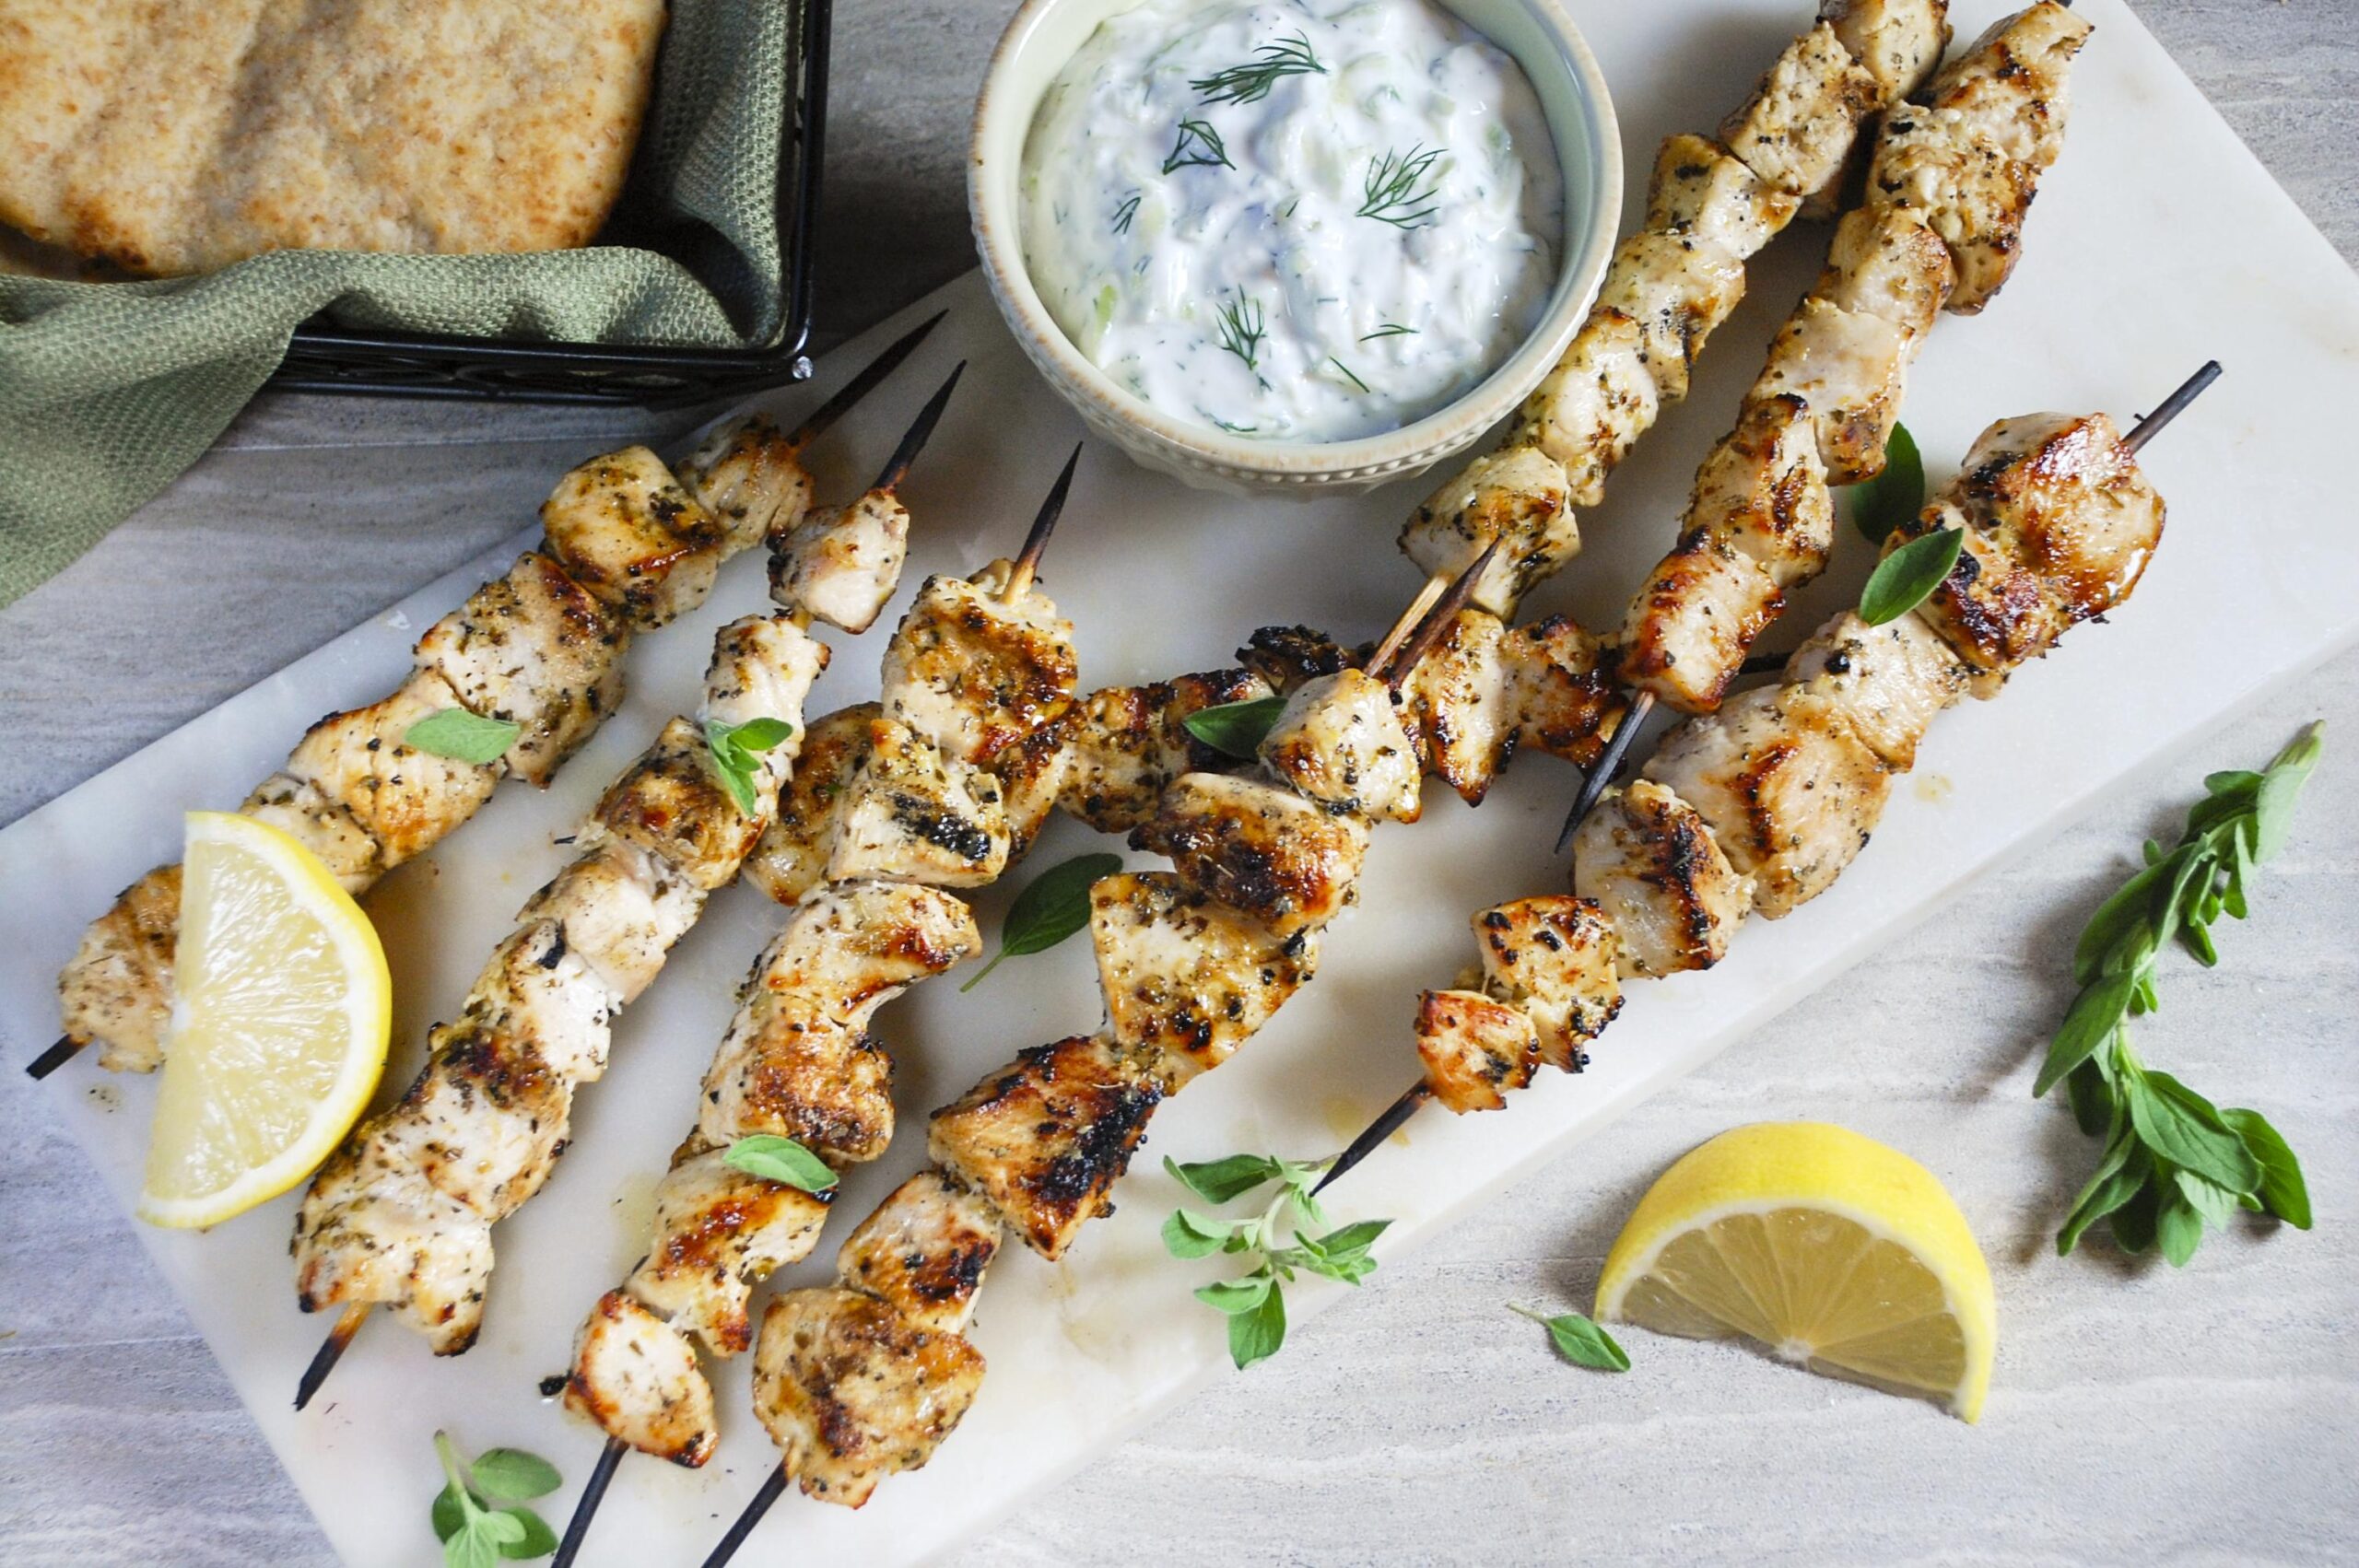  The fresh herbs and garlic-infused marinade make the chicken souvlaki extra flavorful